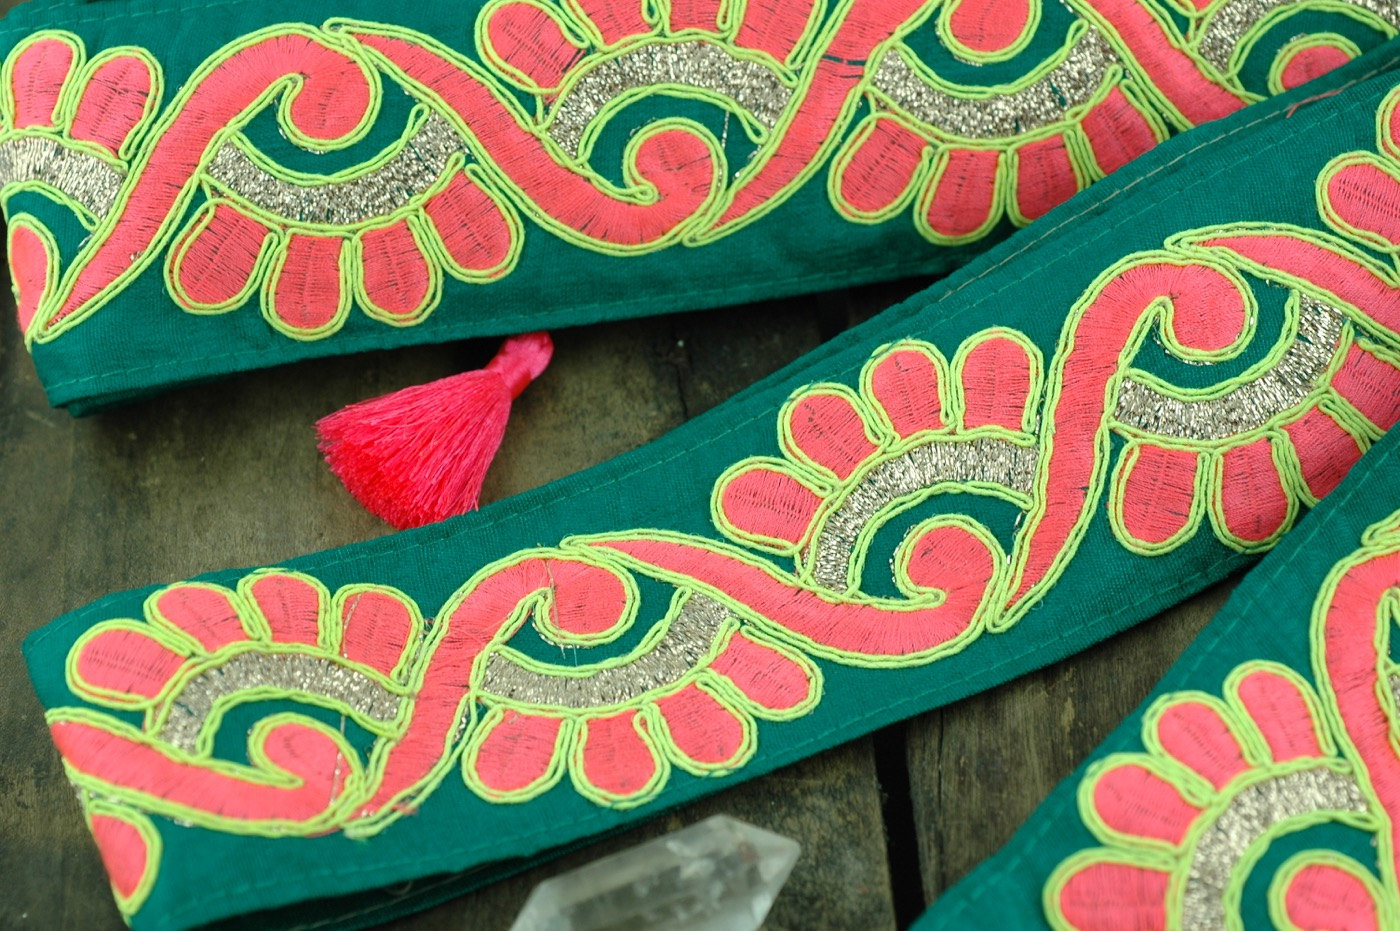 embroidered sari trim from Woman Shops World on Etsy - 3